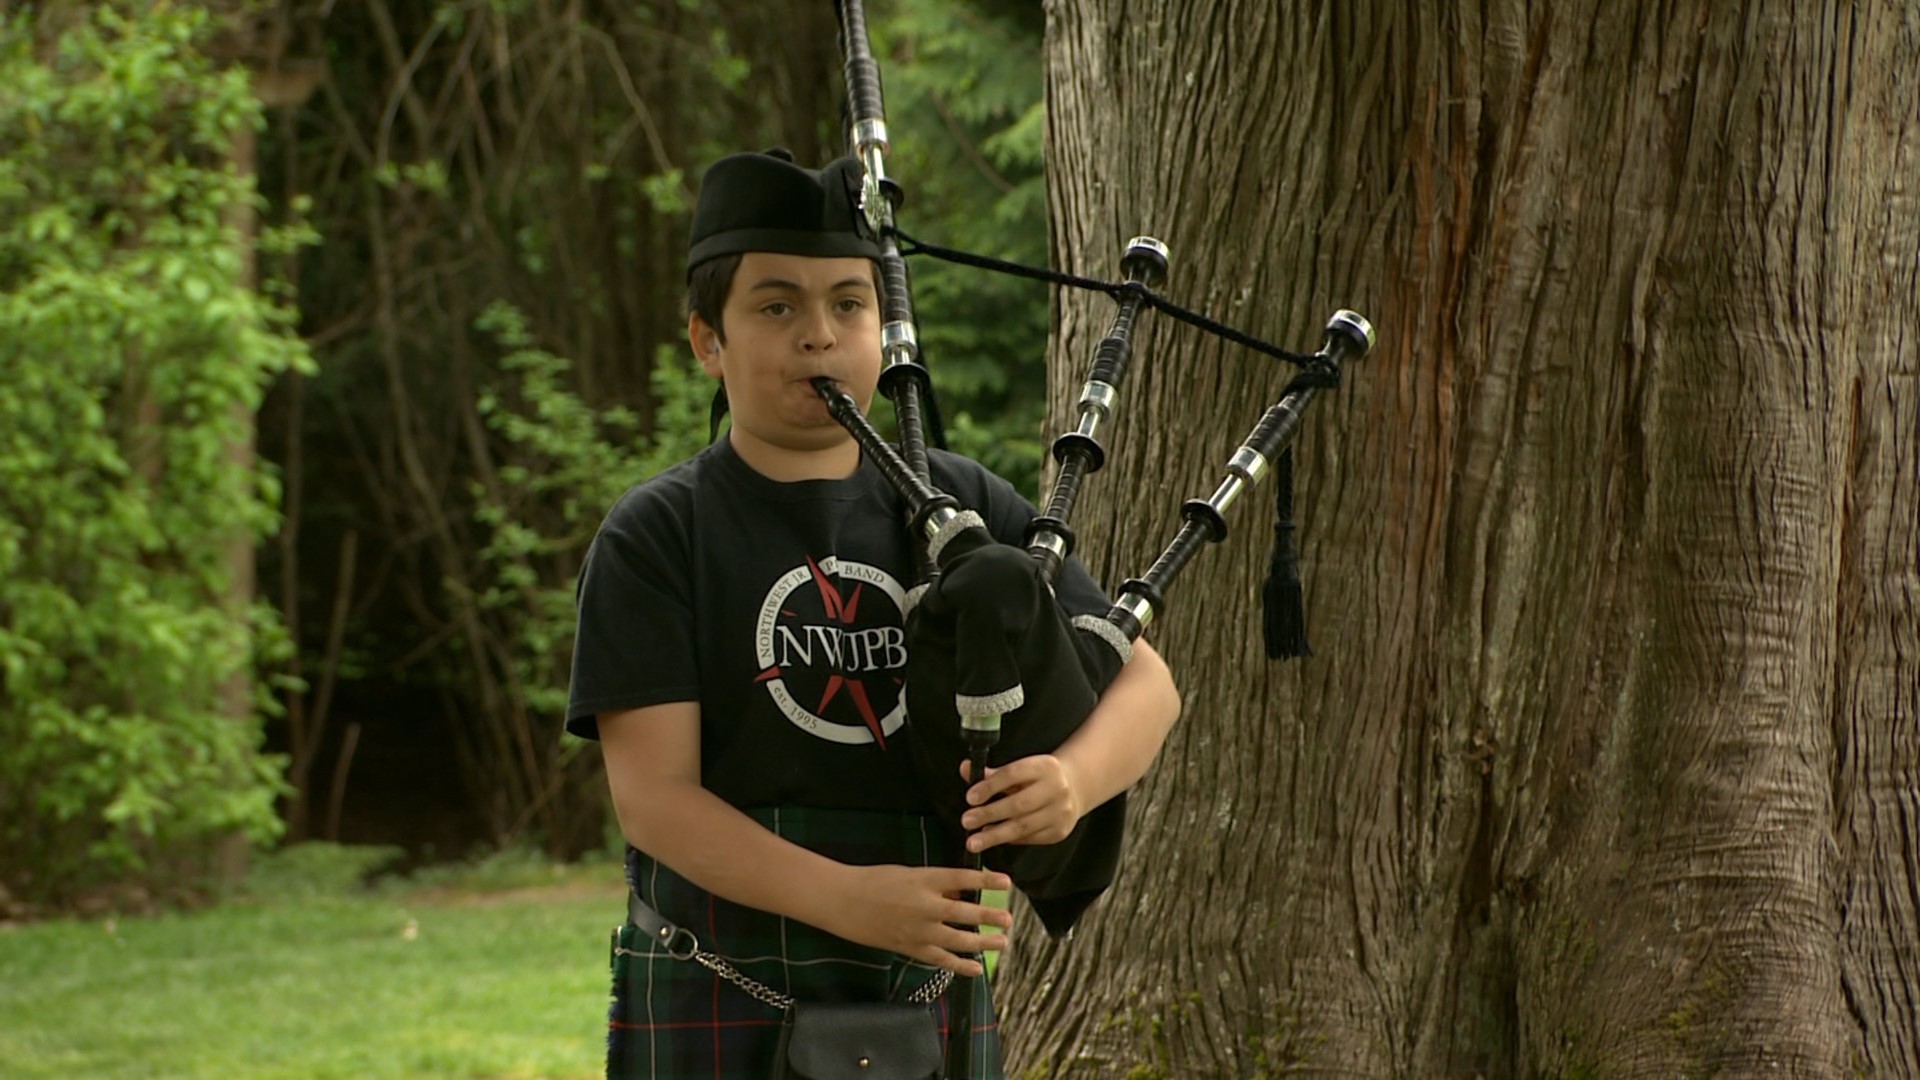 Ayrshire Wedding Bagpiper for hire | Traditional Scottish Music